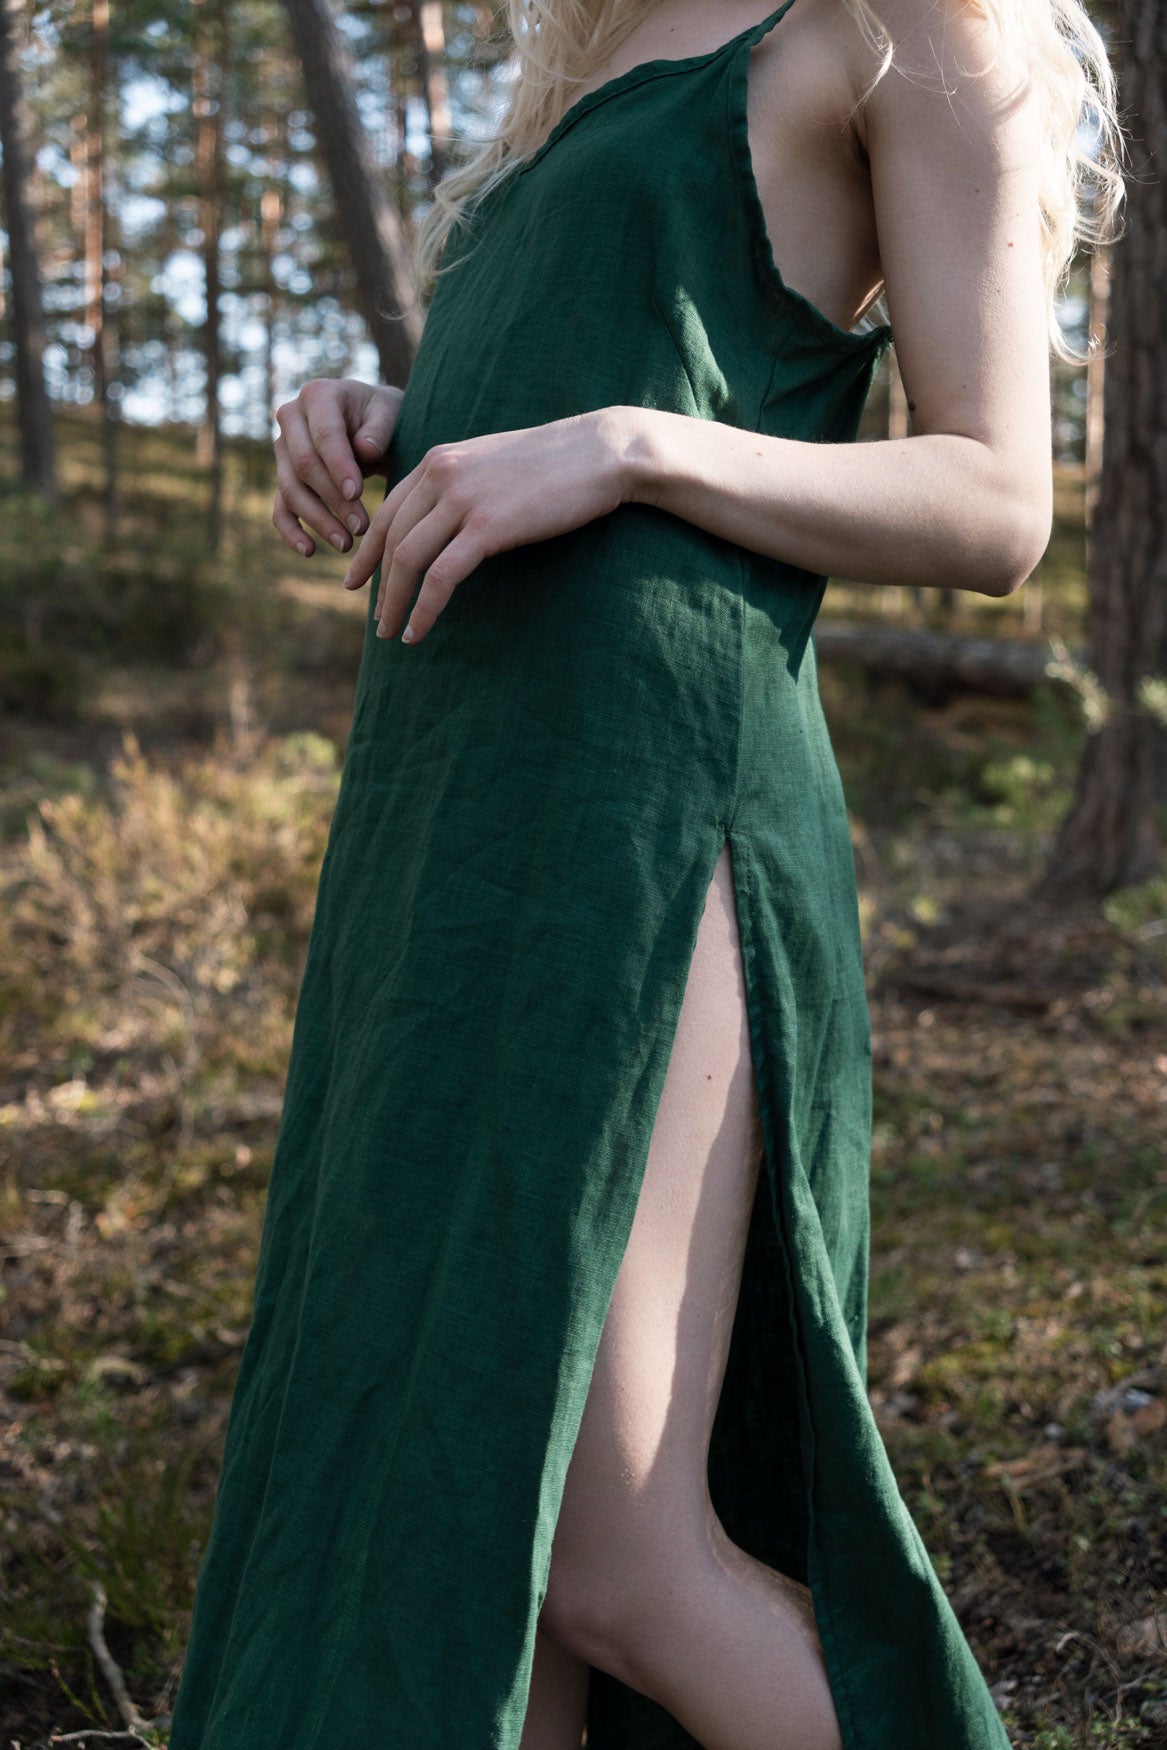 Organic, sustainable, sexy, long green linen nightwear slip dress with spaghetti straps and splits. This linen lingerie nightdress is natural, comfortable, soft and pure. This sleepwear nightgown is a conscious and healthy choice for your body and environment.